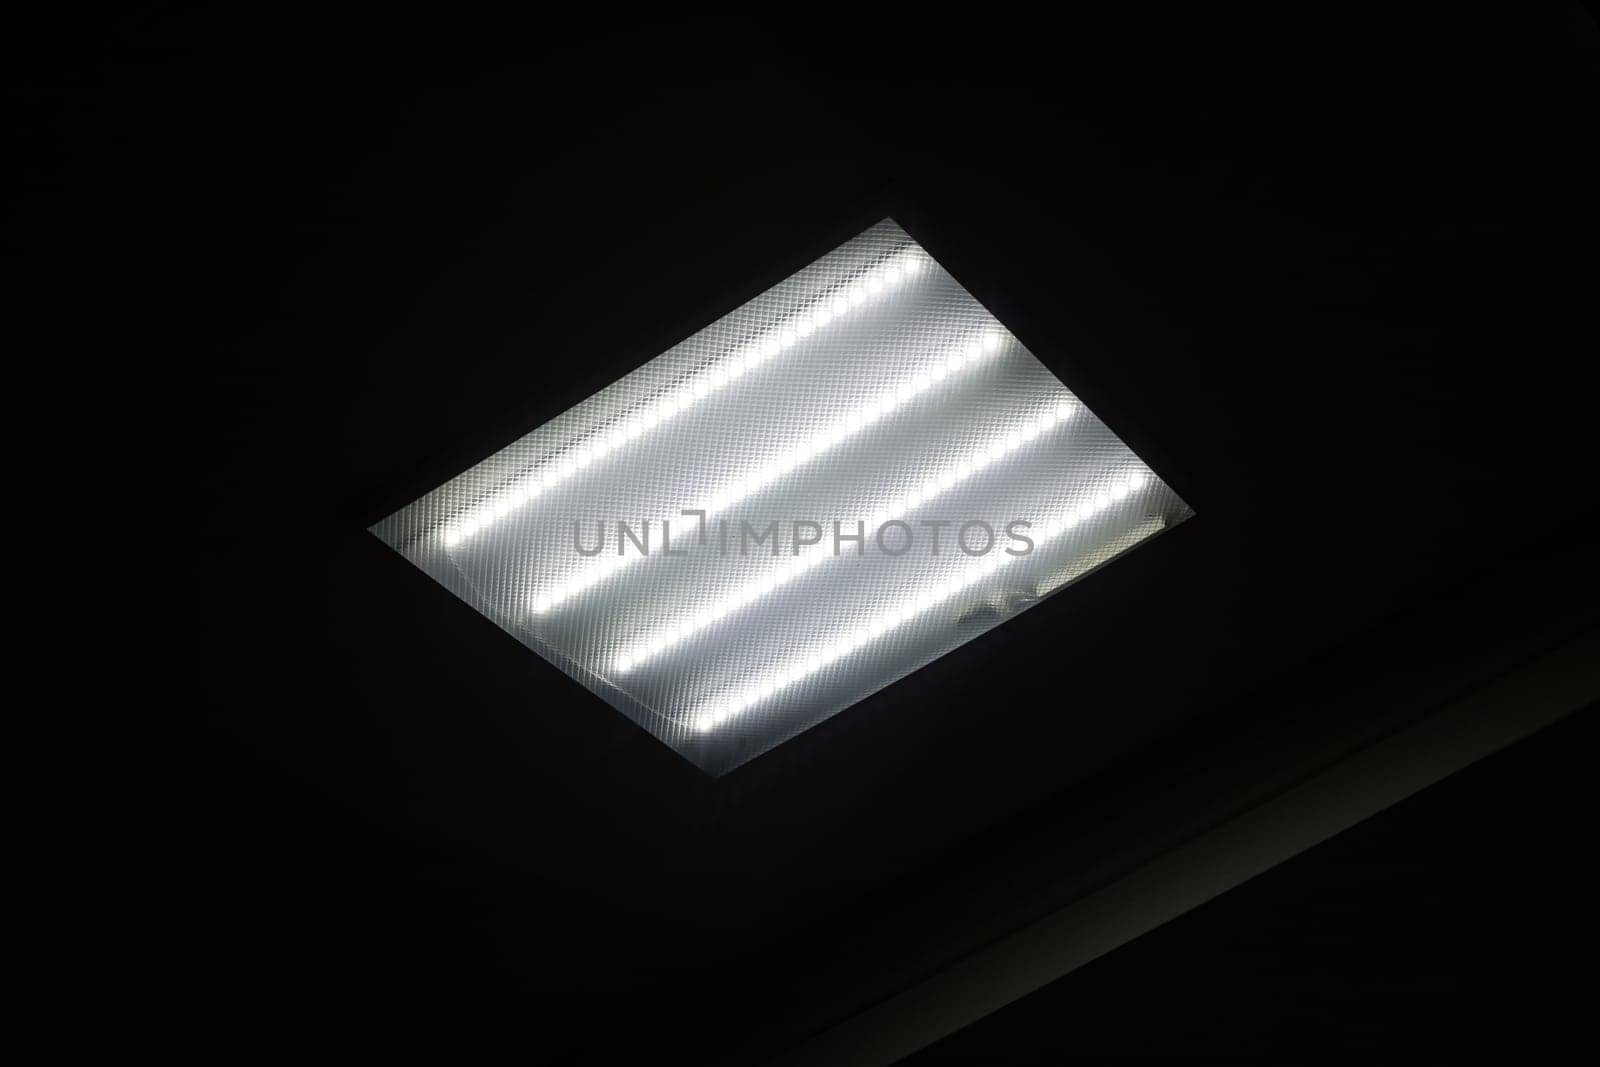 Square fluorescent lamp on the ceiling in the dark by Vera1703